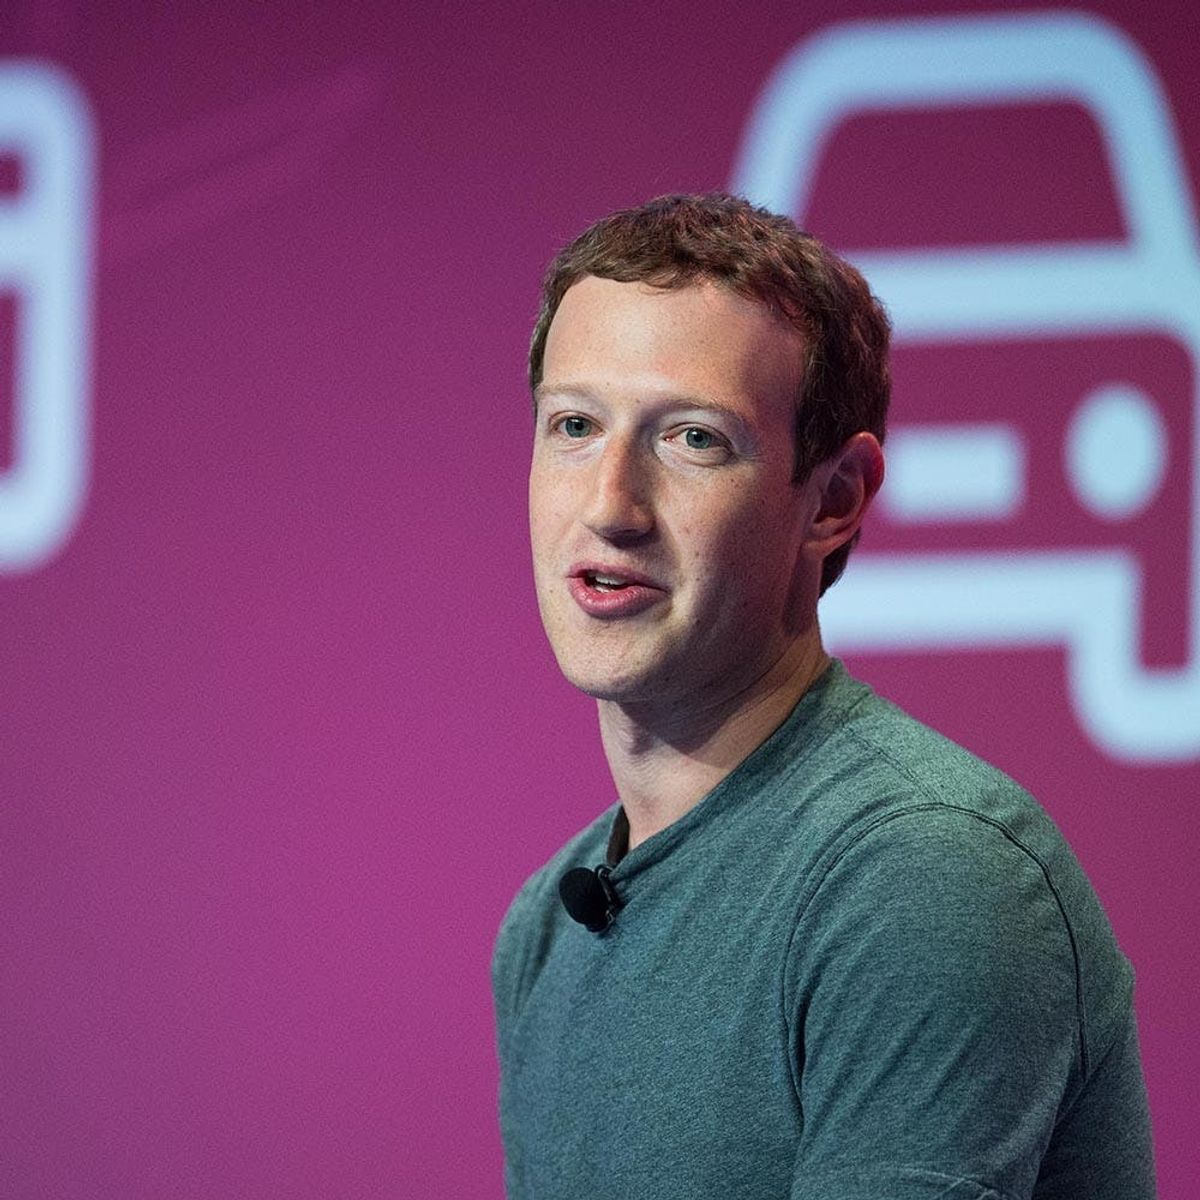 Facebook Is Working With Journalists to Keep Fake News Off Your Feed